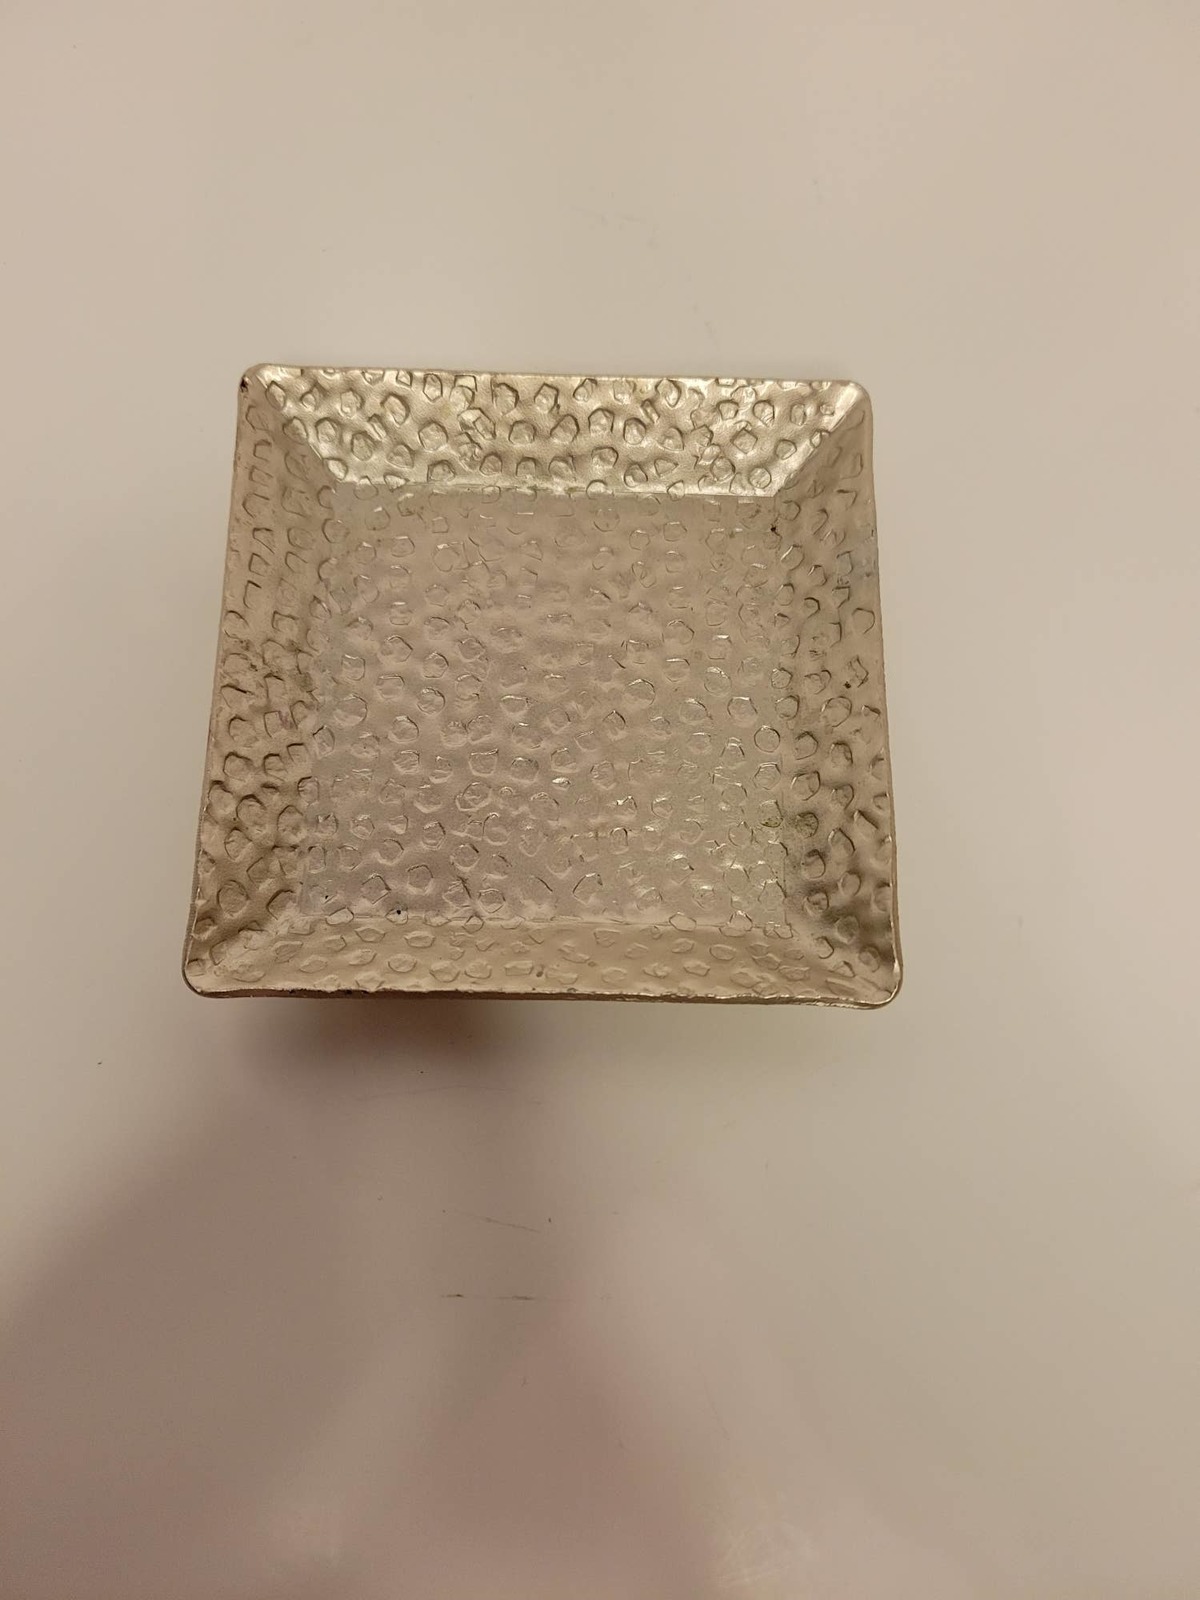 Silver Toned 4" Square Pillar Candle Holder - $5.93